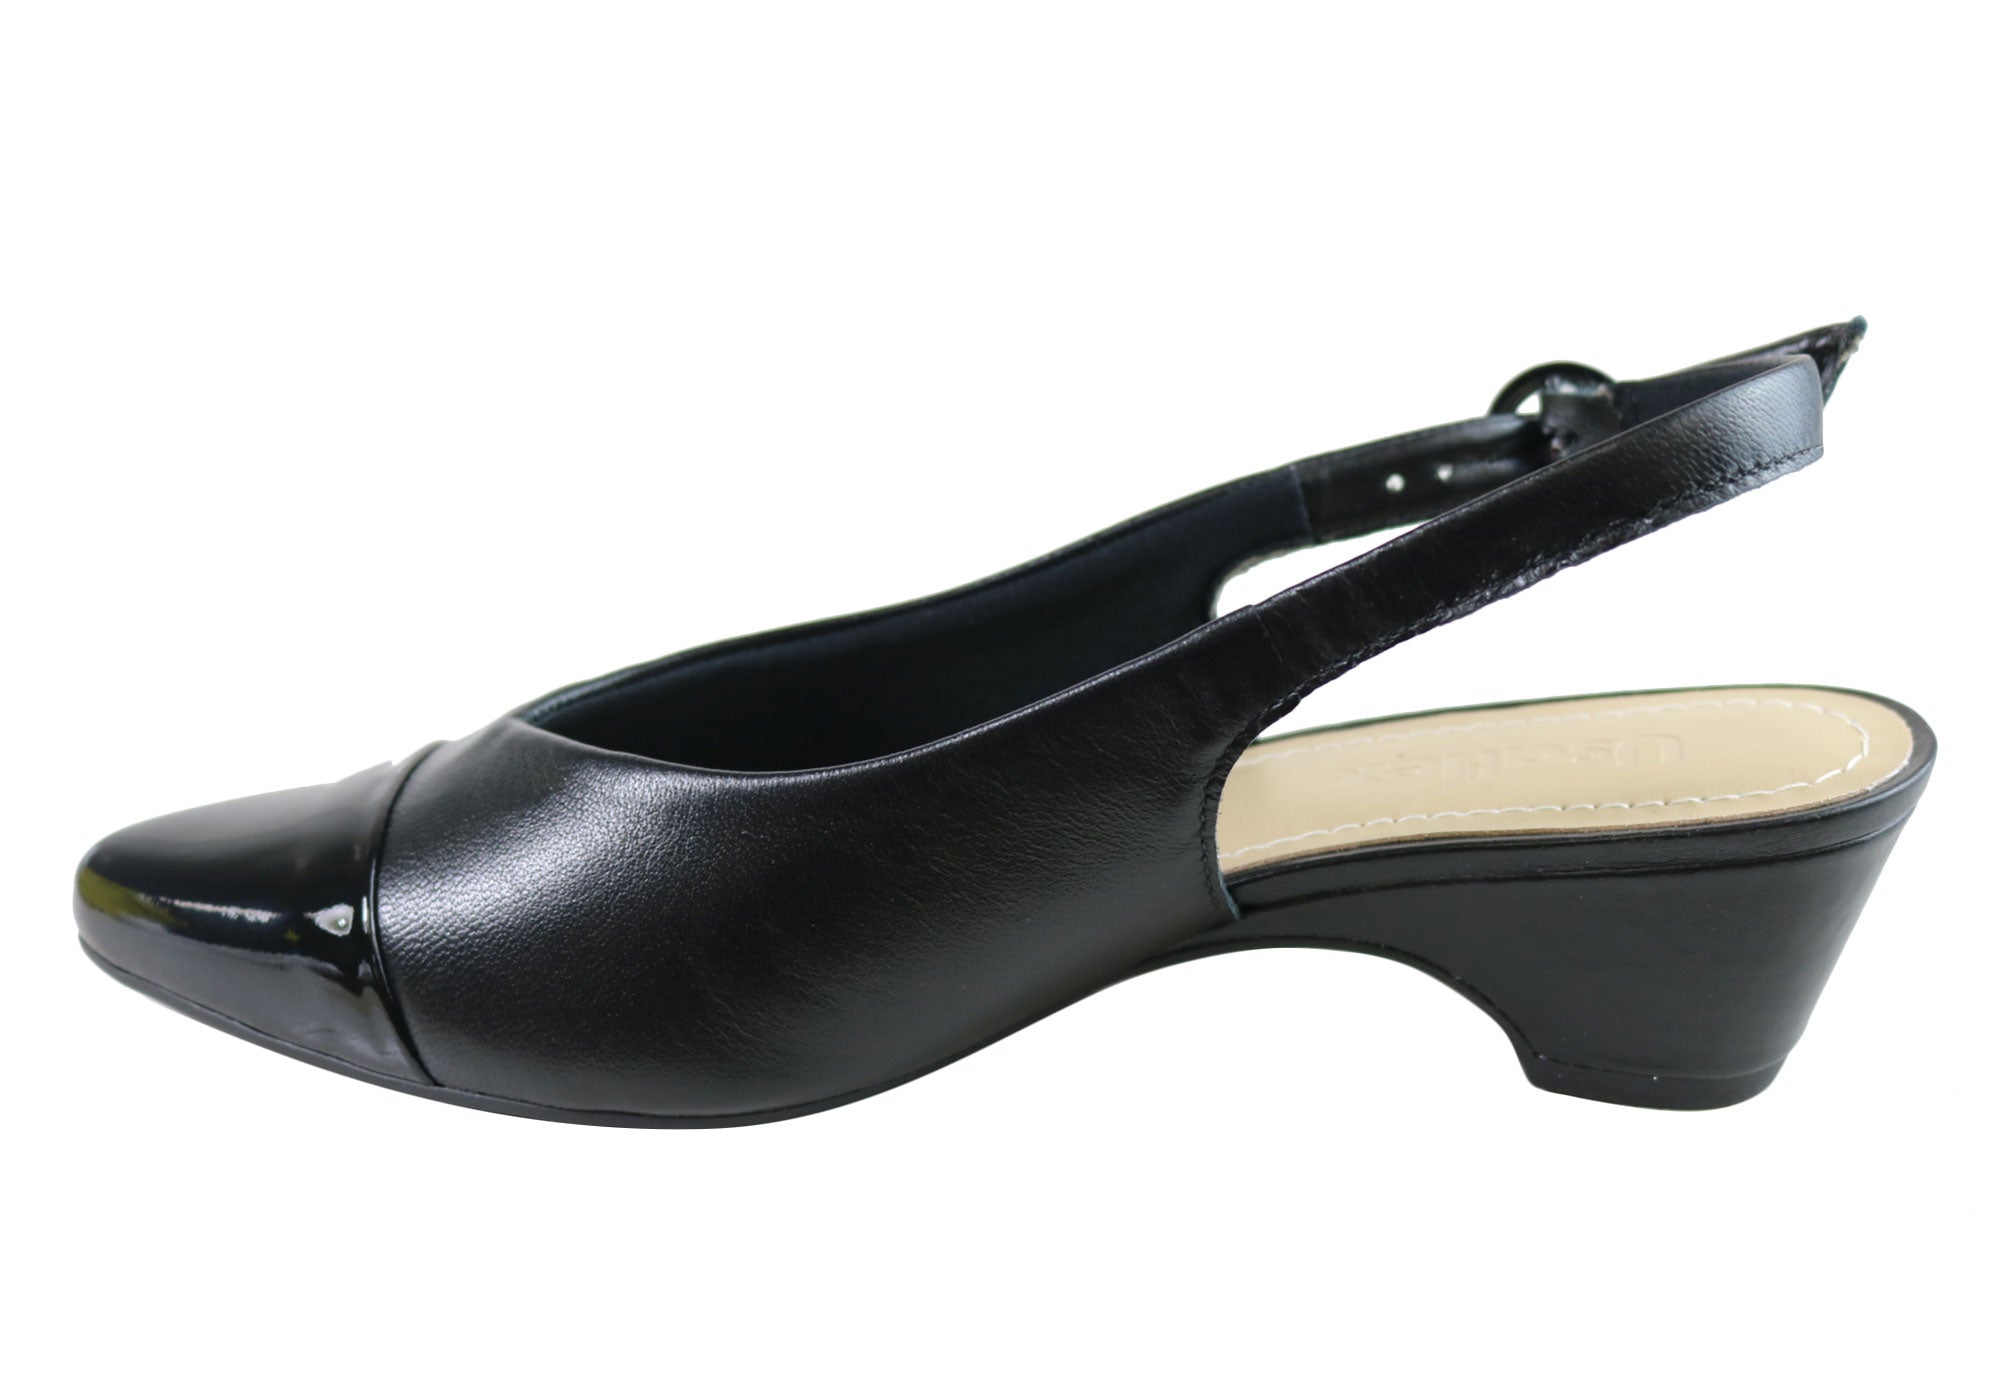 Usaflex Ryleigh Womens Low Heel Leather Shoes Made In Brazil